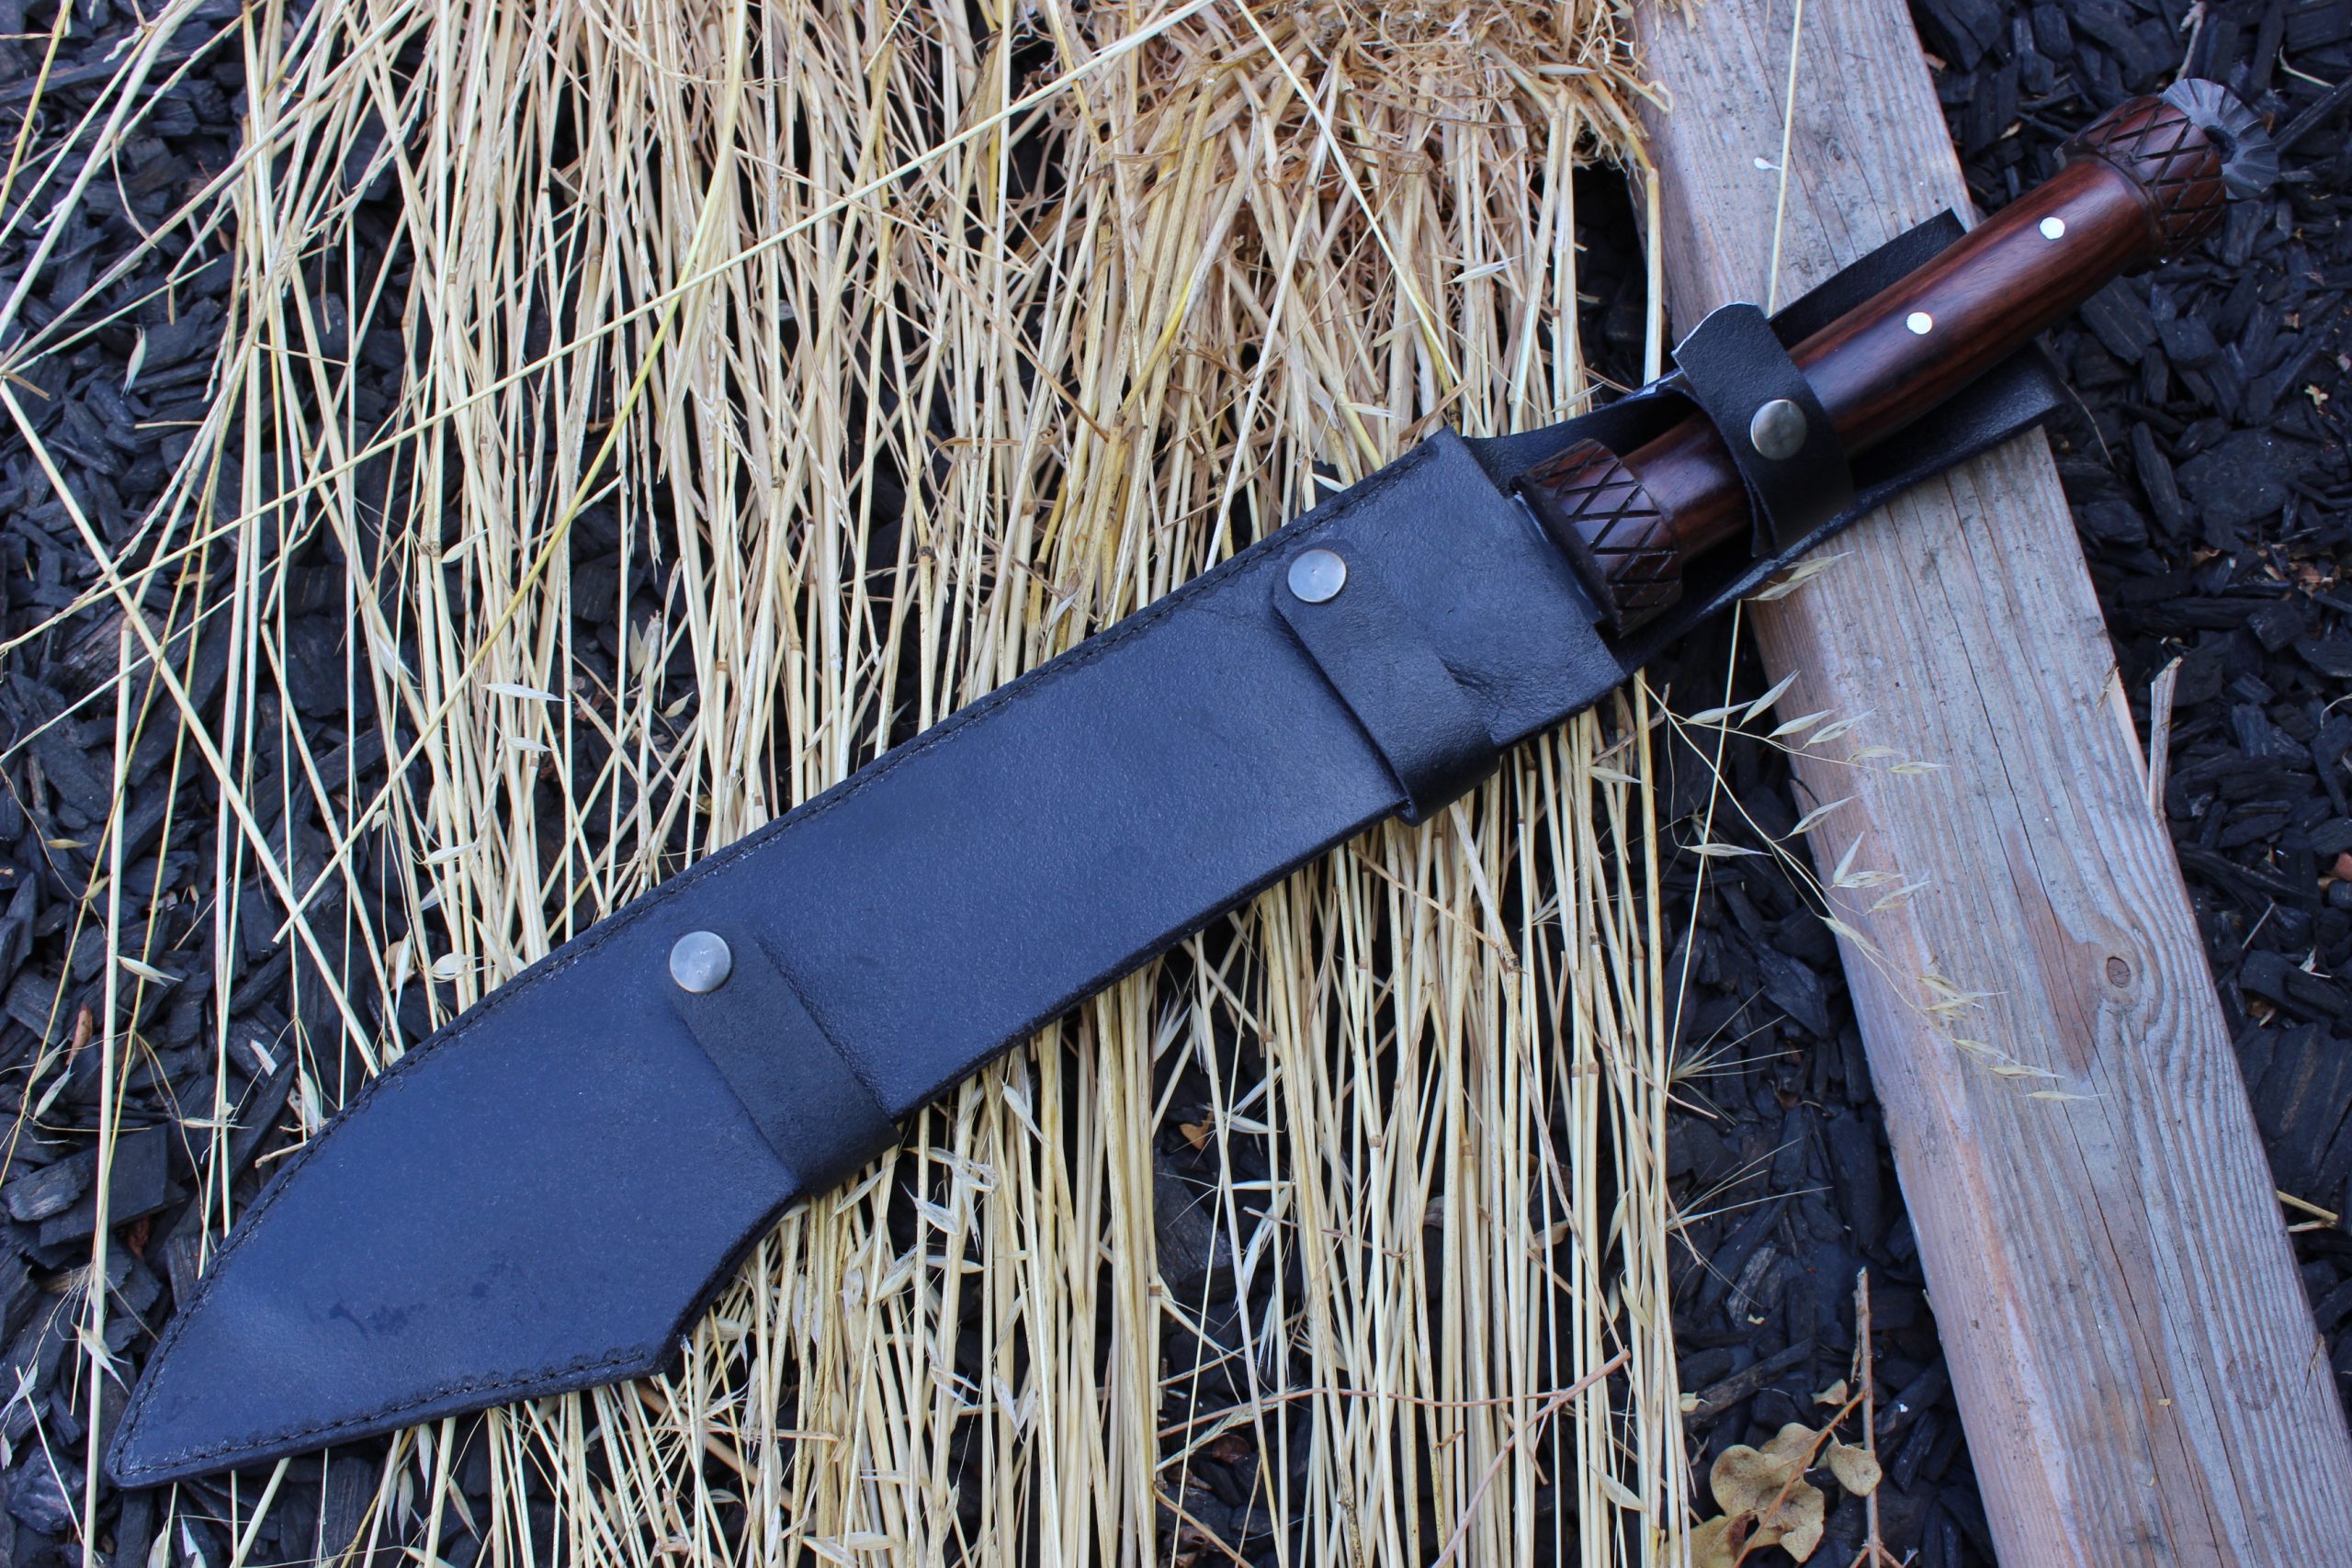 15" Expedition Cleaver - Rust Free Hand Forged Blade Machete-9746